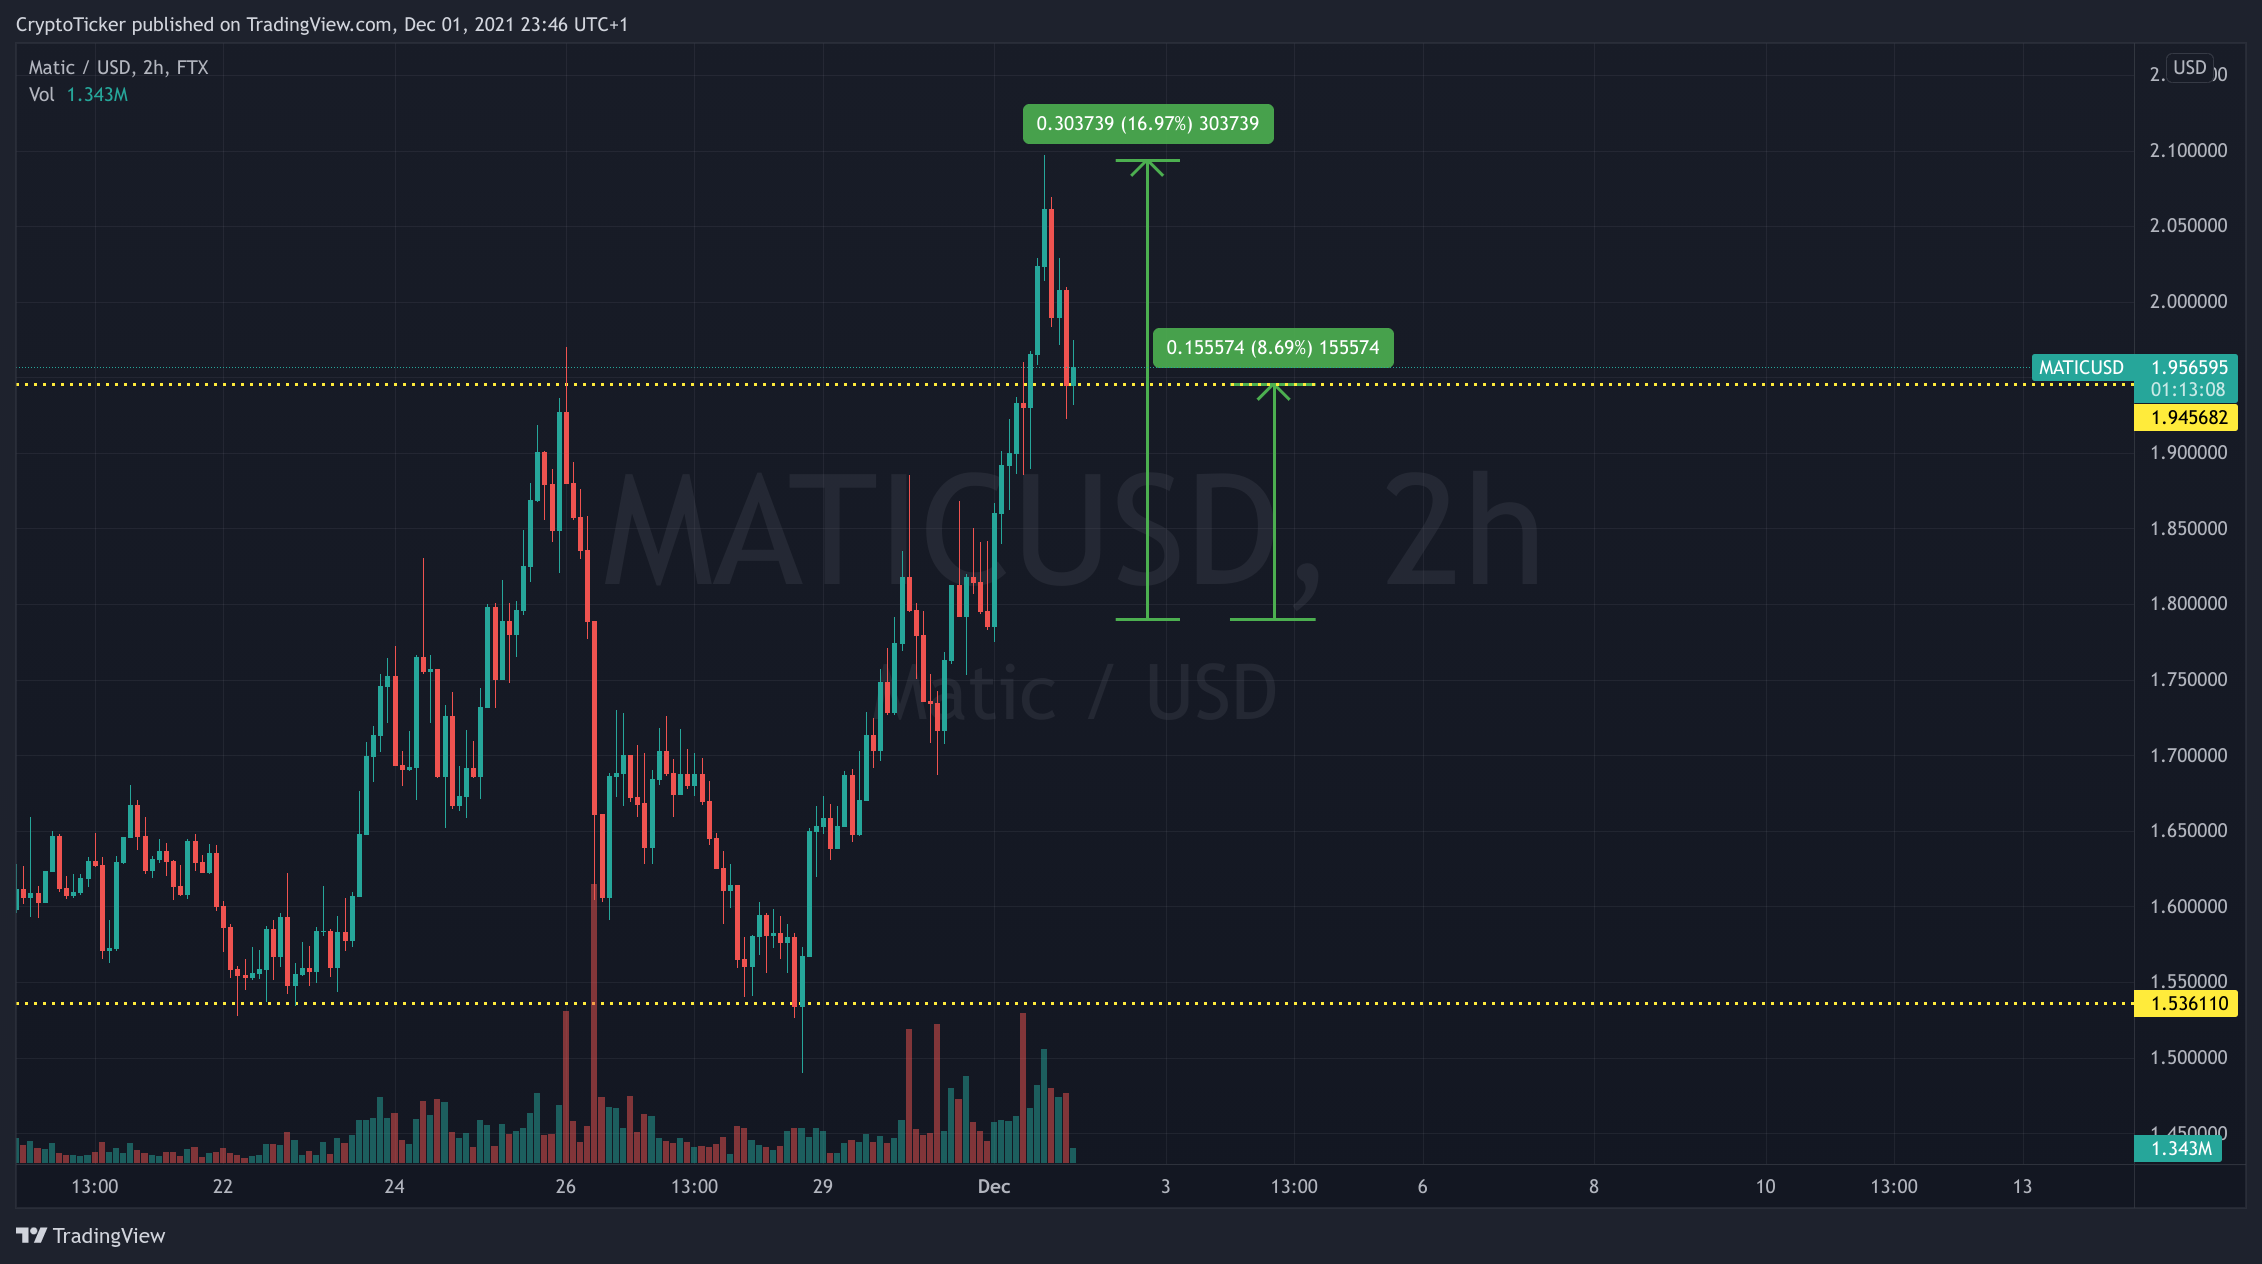 MATIC/USD 2-hours chart showing MATIC's rise following the news 